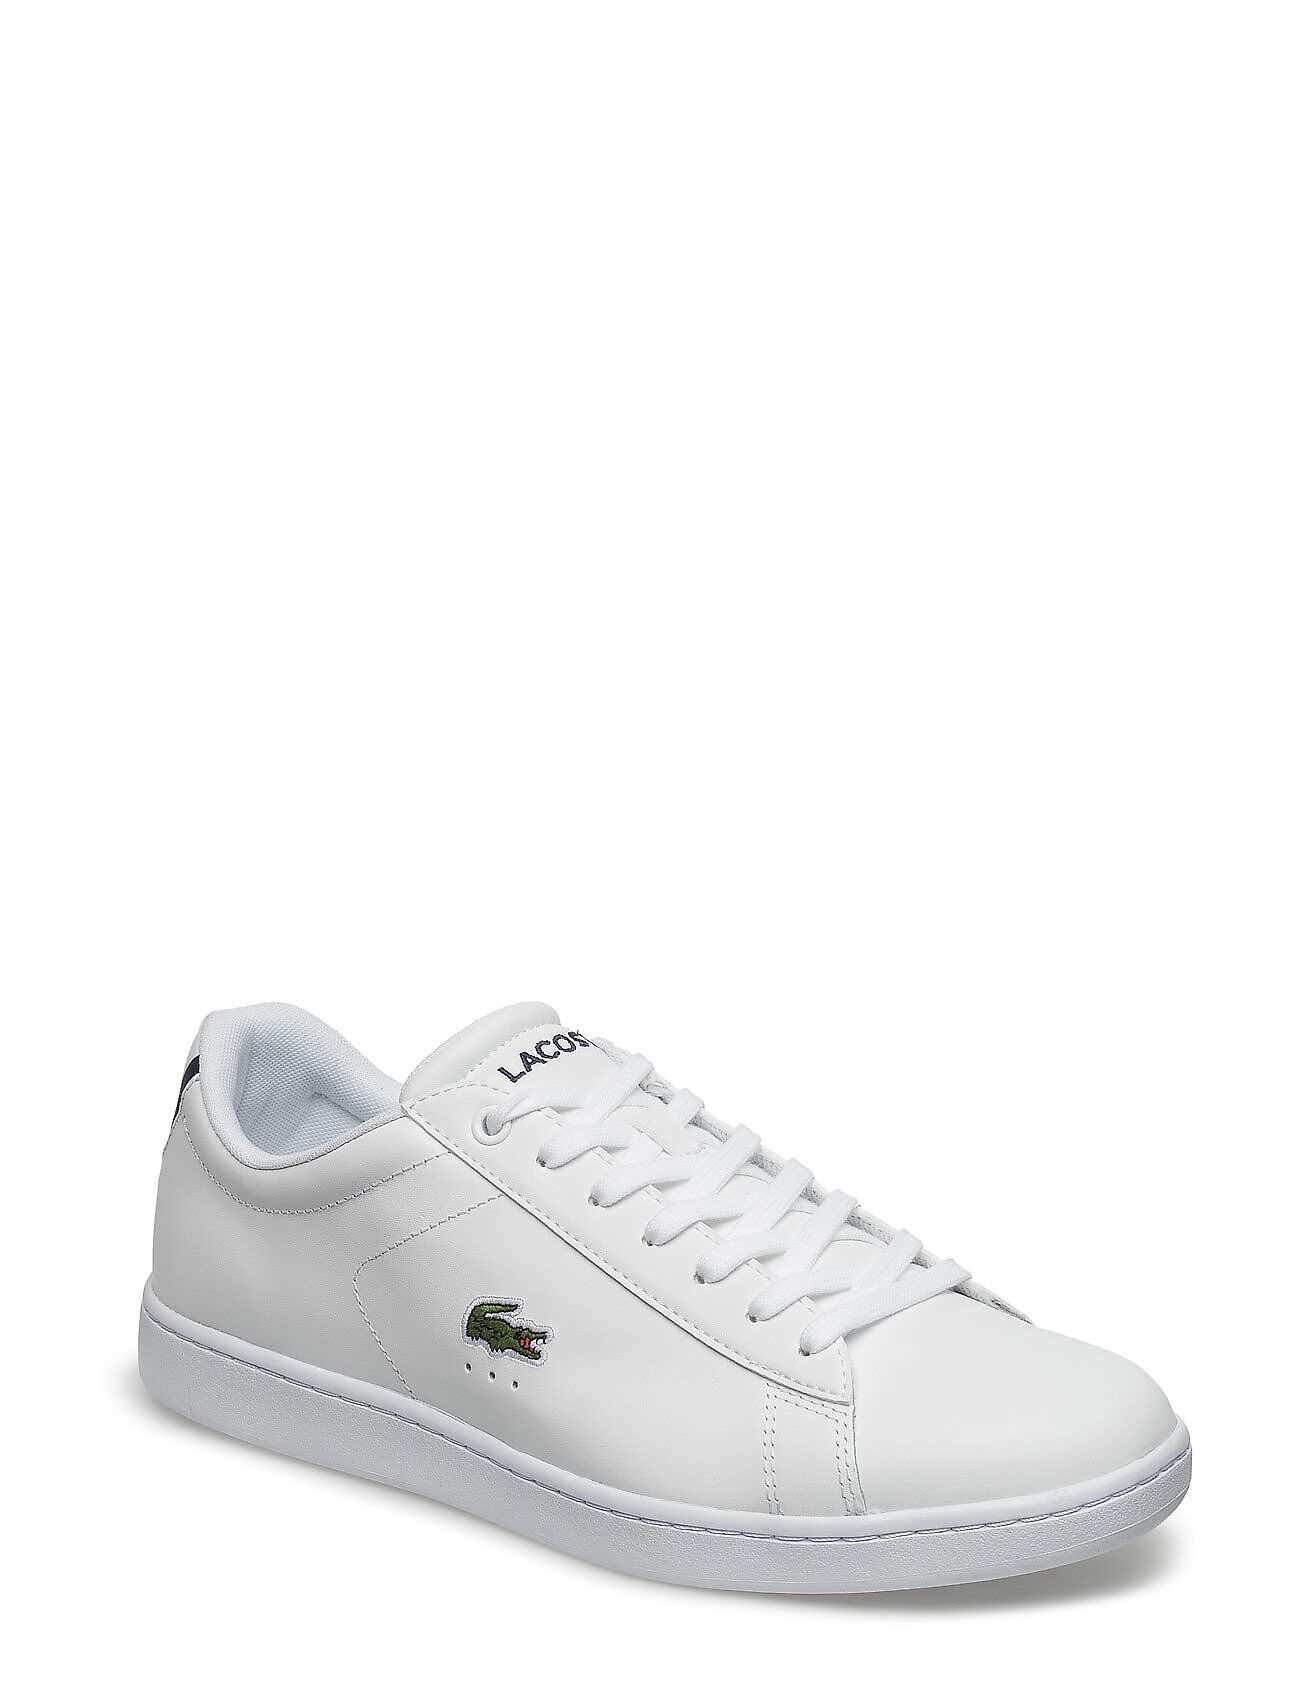 Lacoste Shoes Carnaby Evo Bl 1 Sma Lave Sneakers Hvit Lacoste Shoes